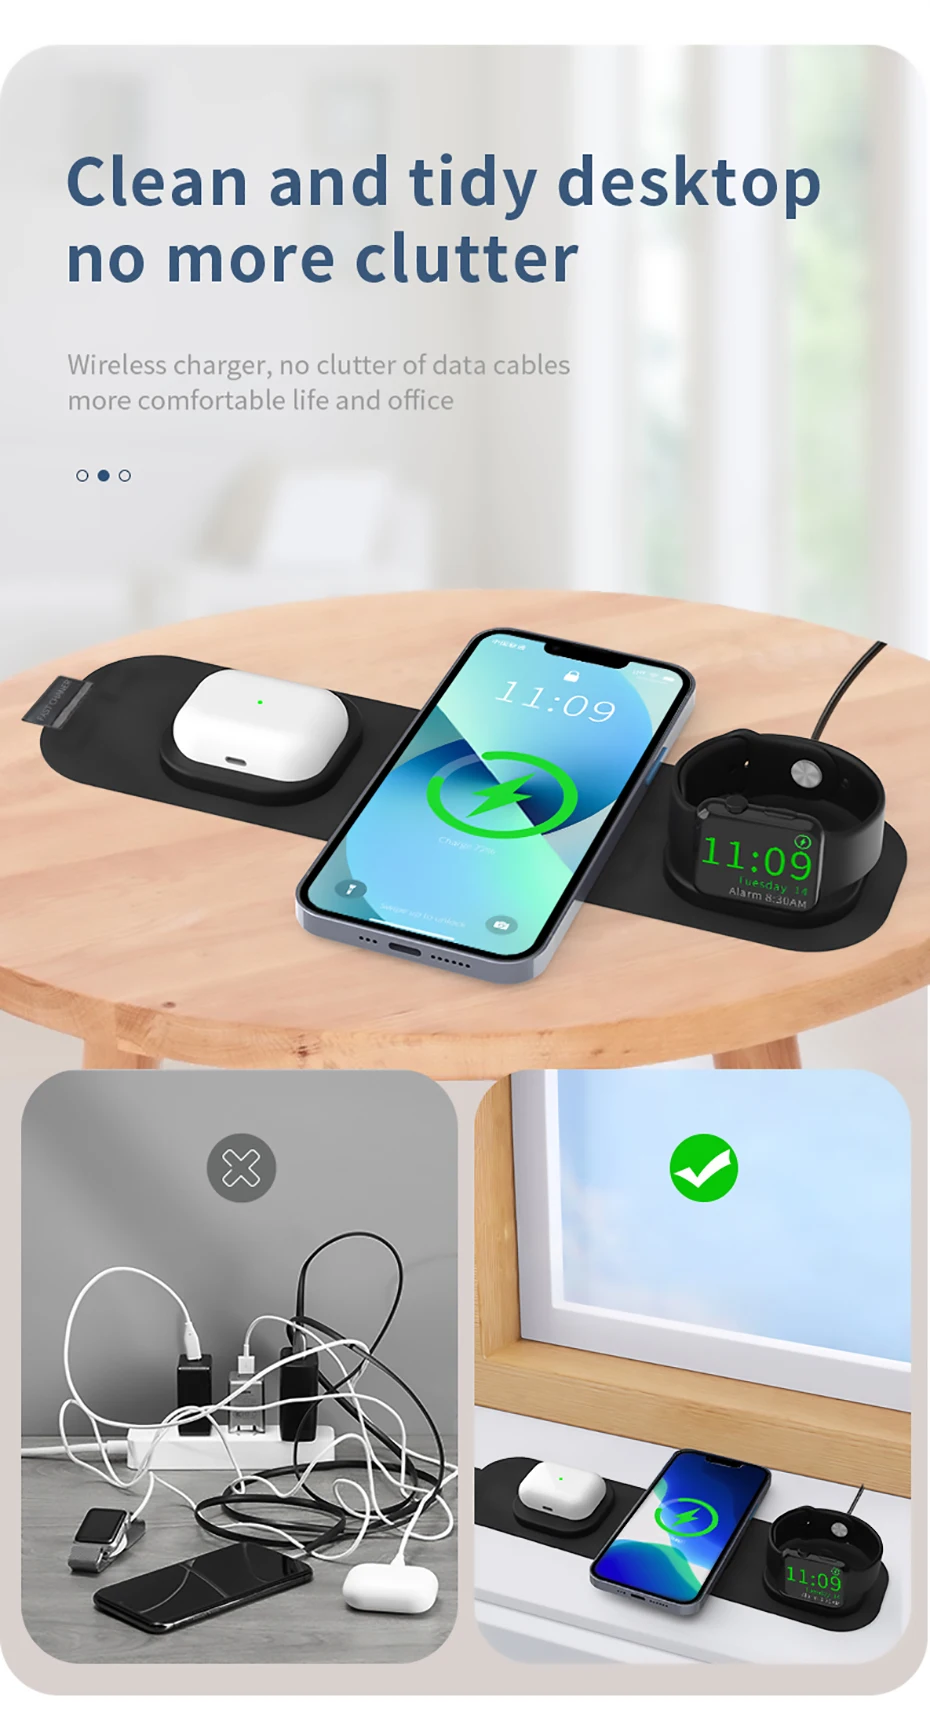 3 In 1 Fabric Travel Wireless Charger, portable multifunction travel wireless charger, Fast Wireless Charging Pad, Foldable Wireless Charging Station